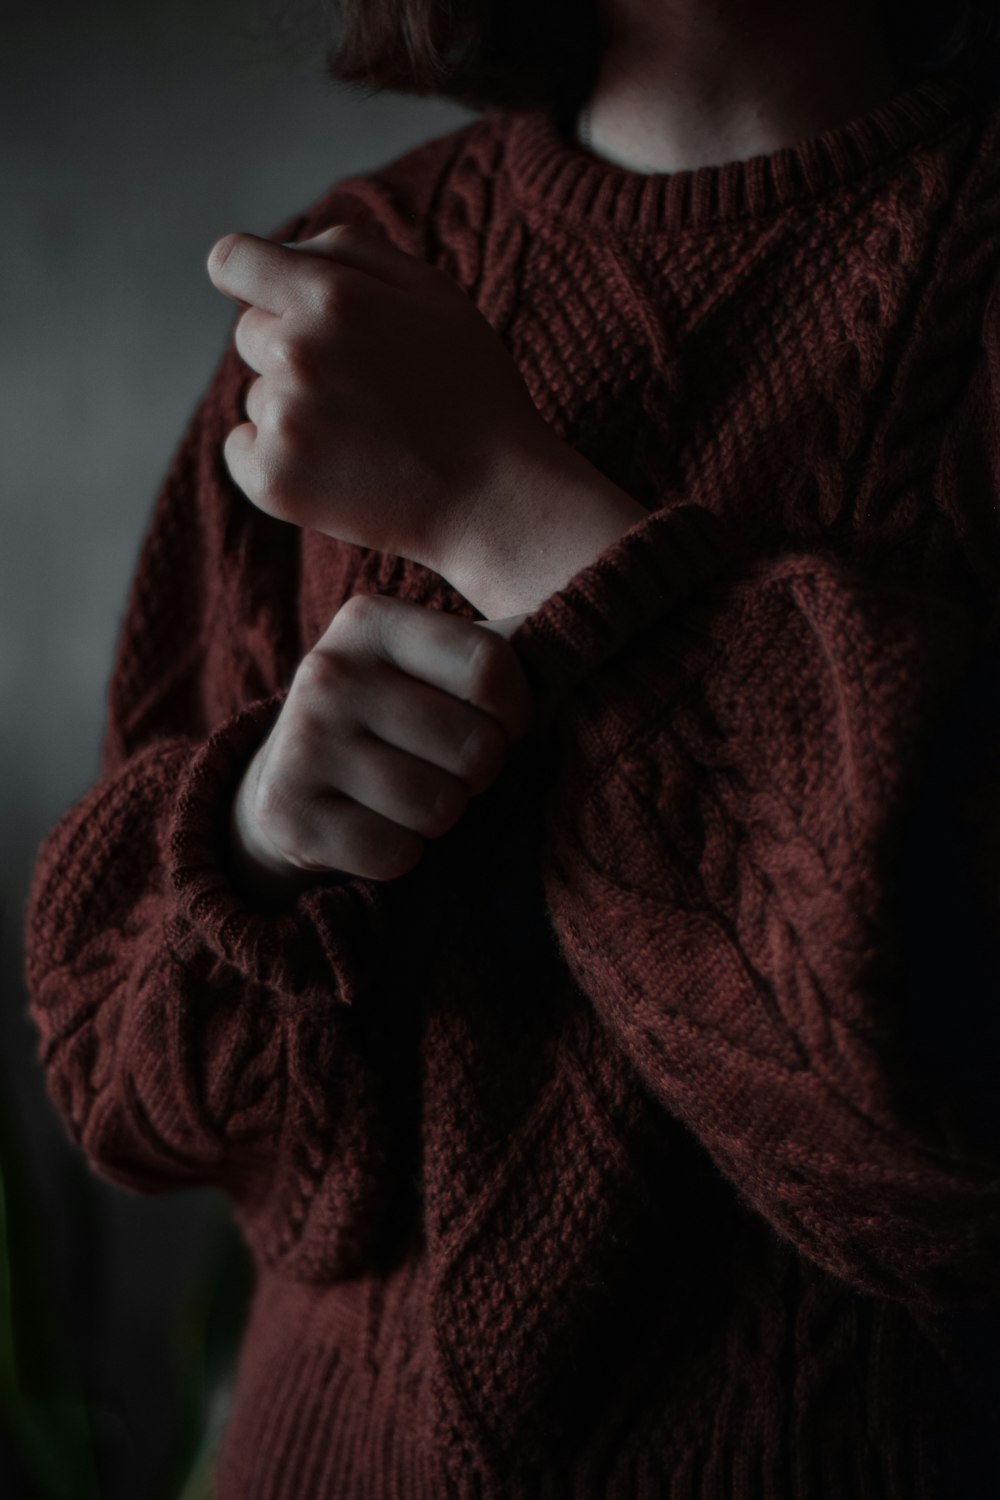 person holding red knit textile